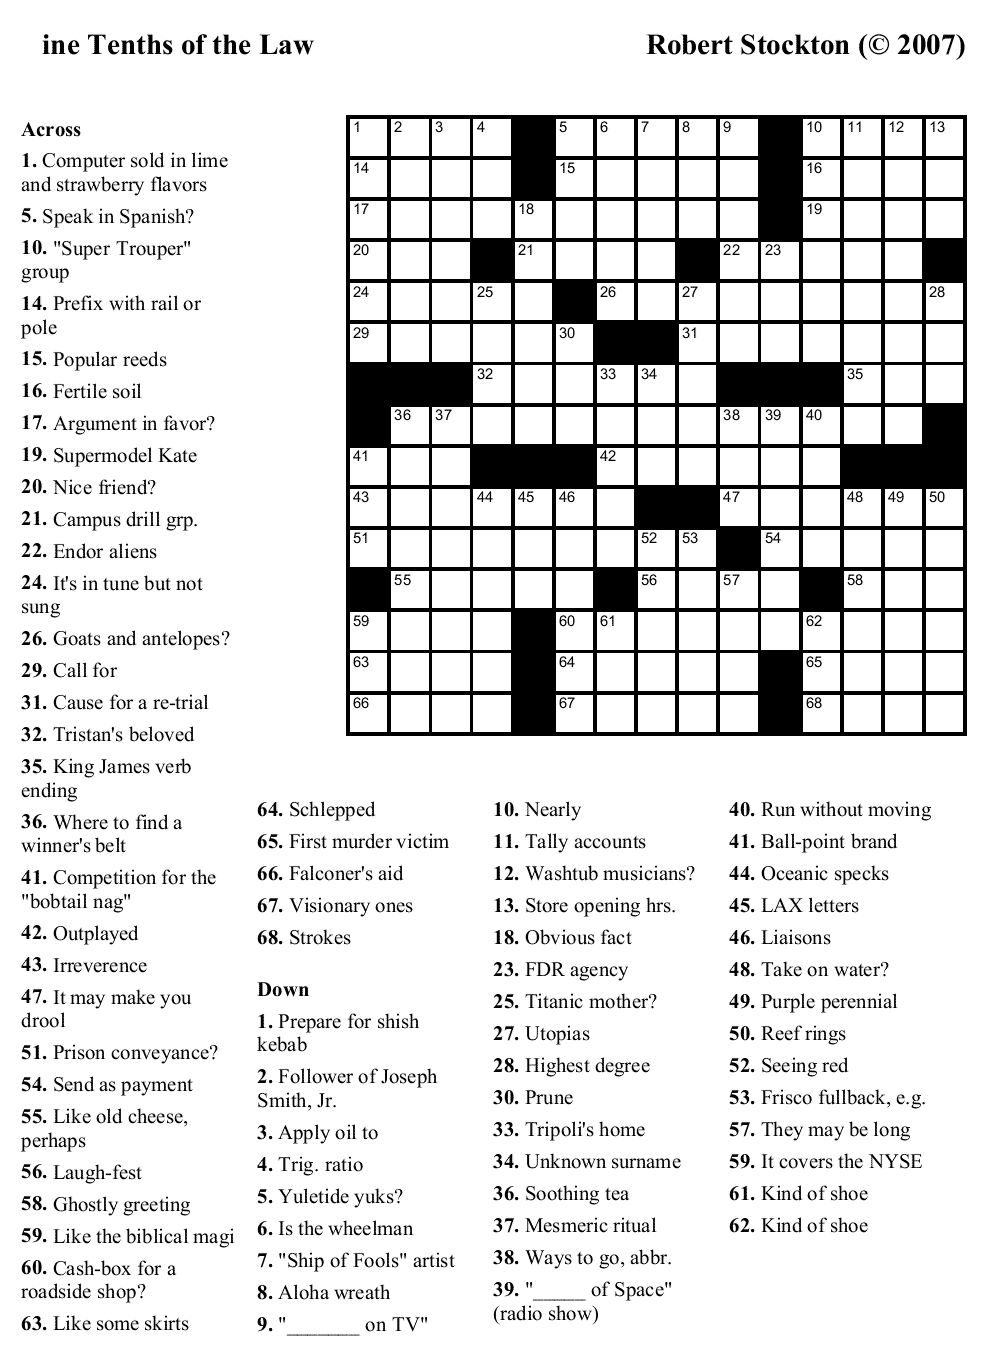 Crossword Puzzles Printable - Yahoo Image Search Results | Crossword - Printable Crossword Puzzle Free